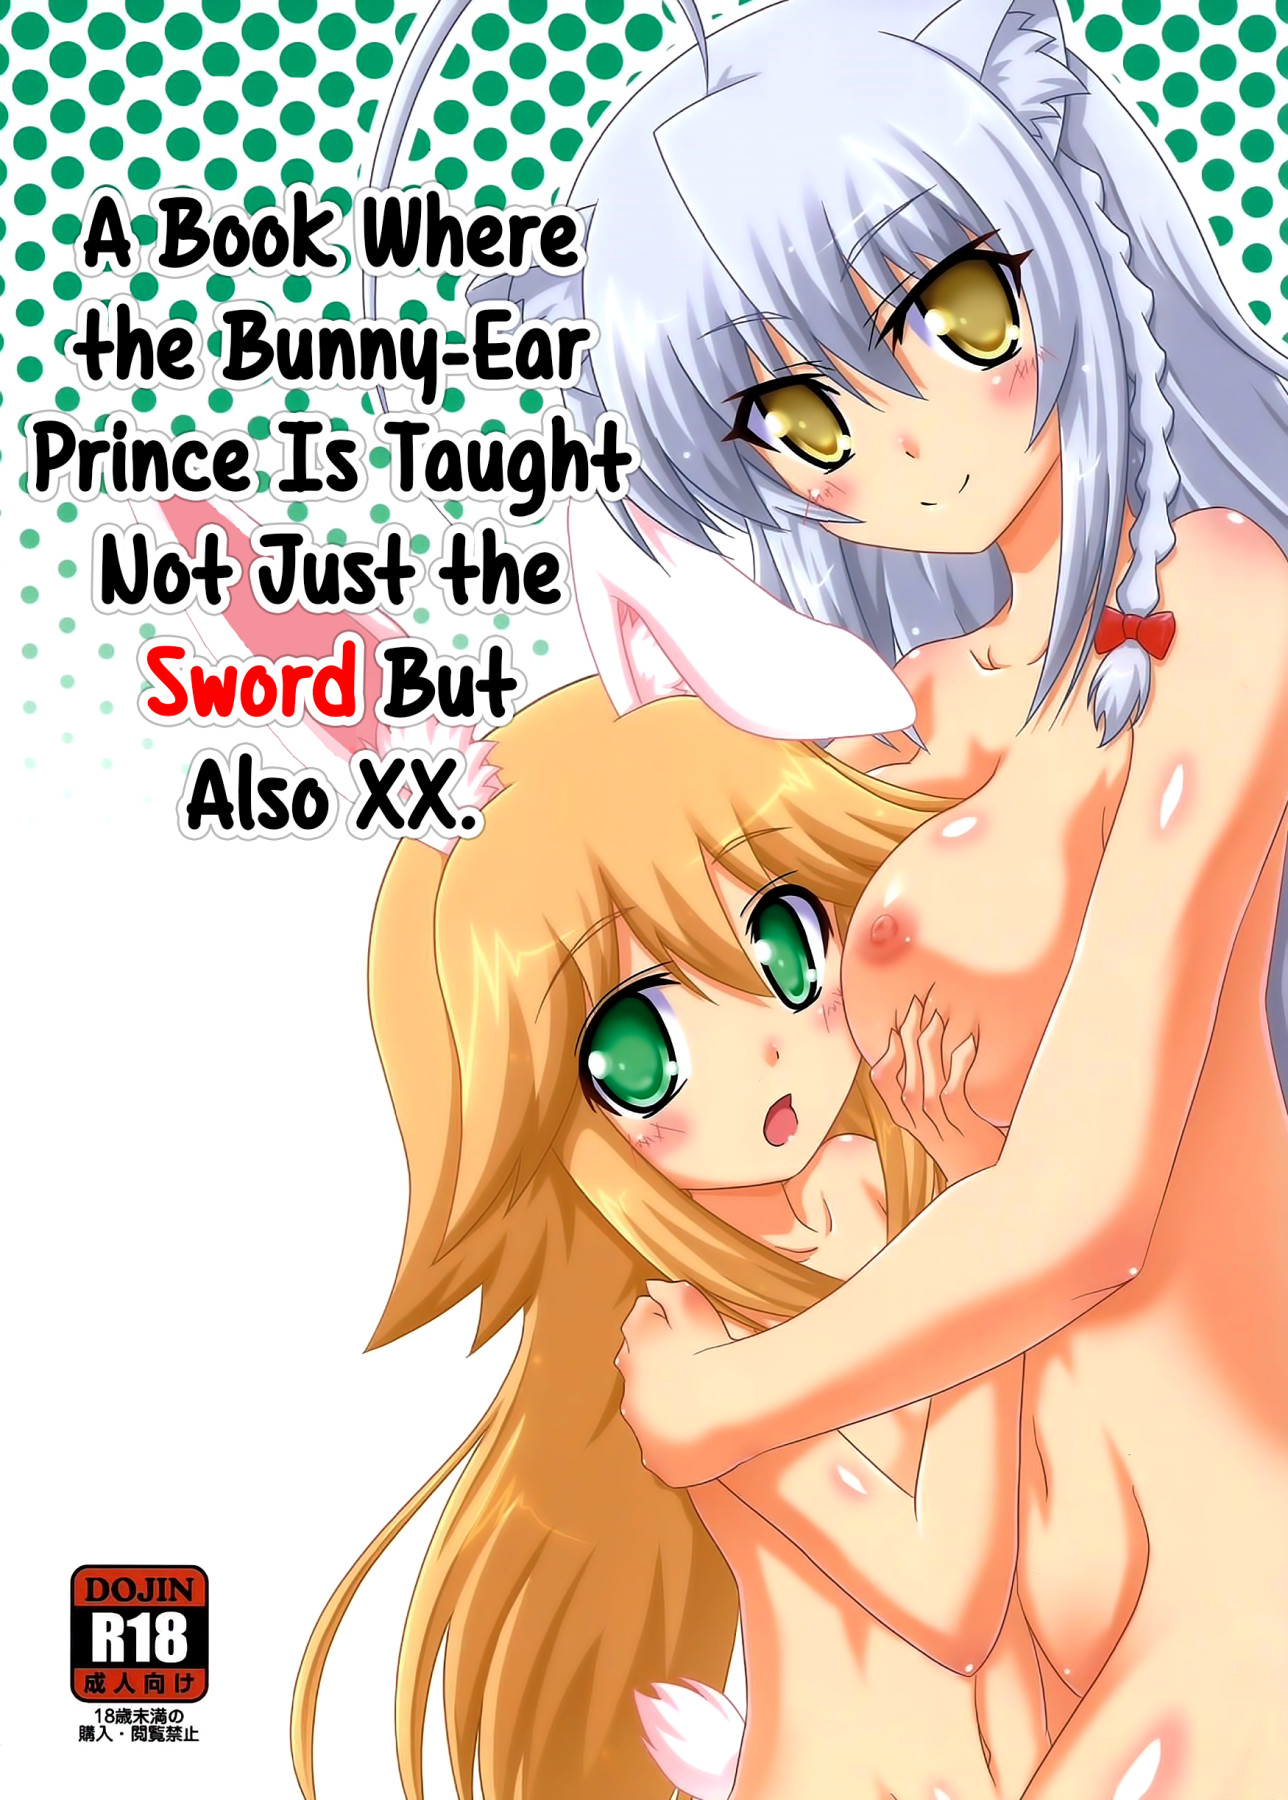 Hentai Manga Comic-A Book Where the Bunny-Ear Prince Is Taught Not Just the Sword But Also XX-Read-1